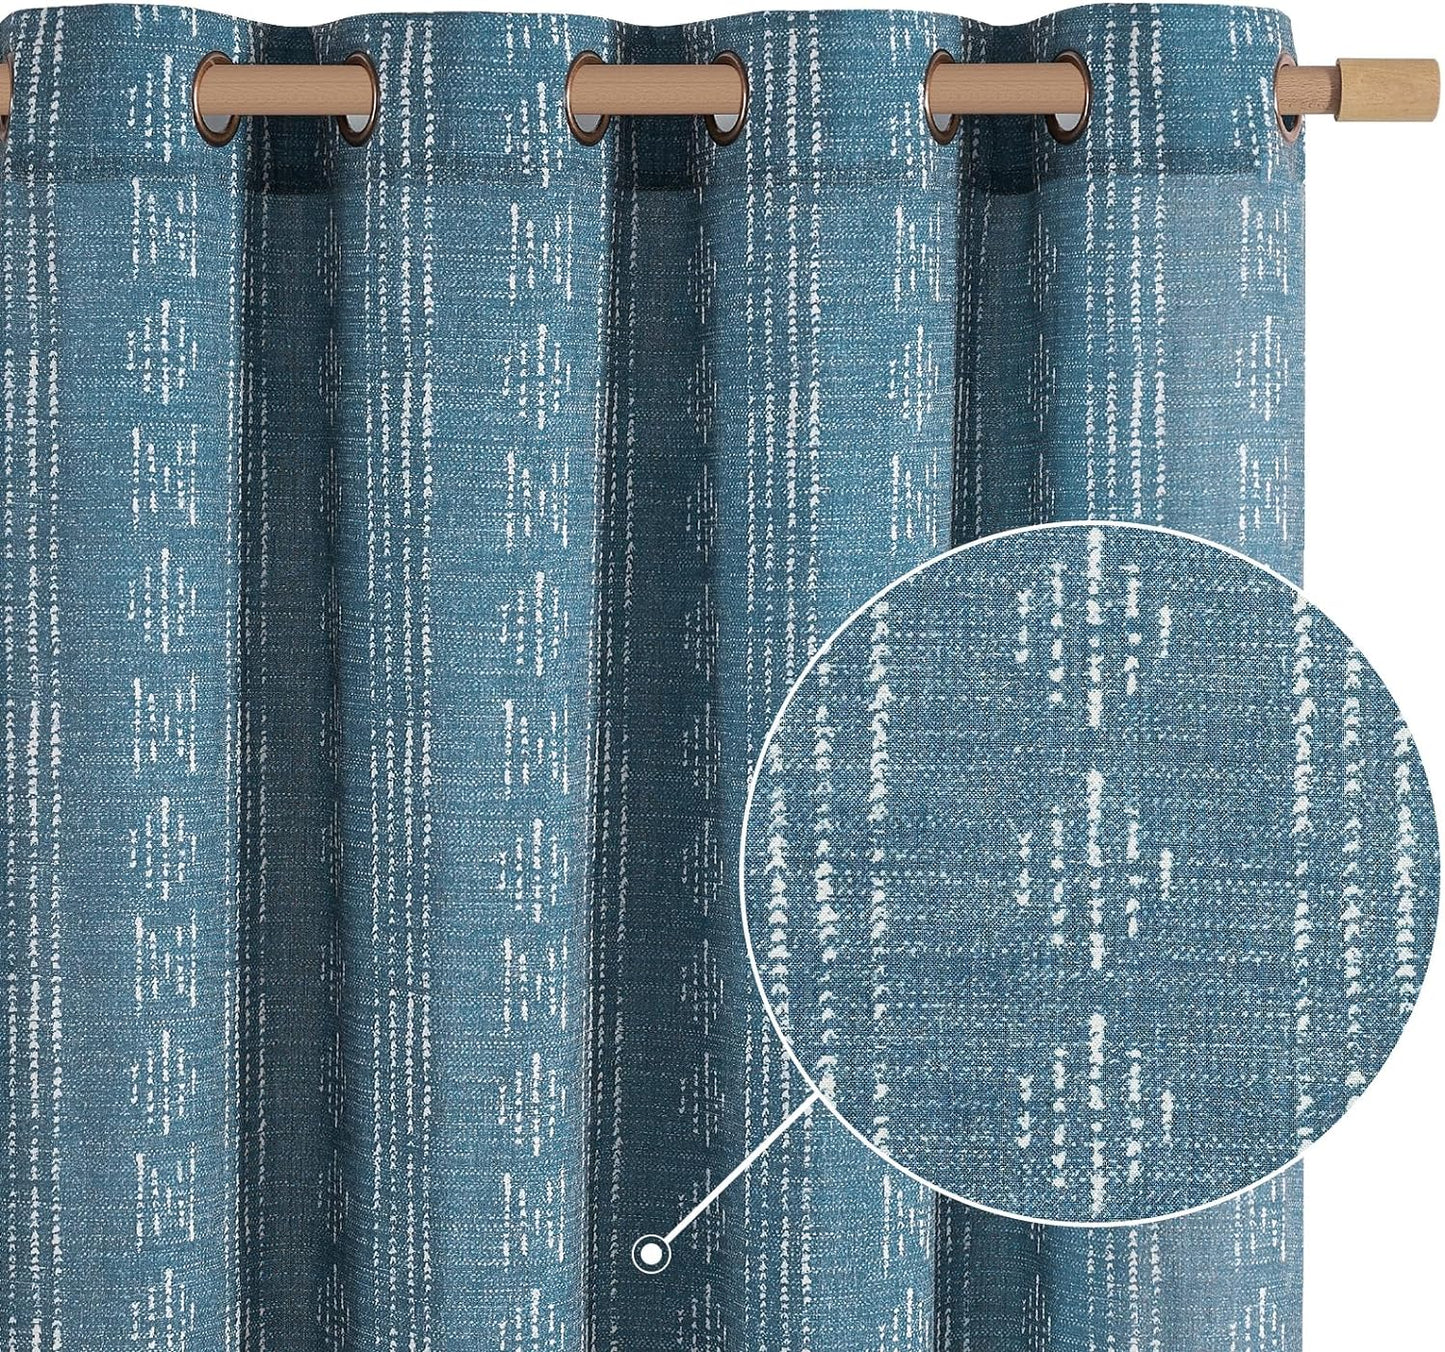 Jinchan Boho Curtains Linen Sliding Patio Door Curtains 84 Inches Long 1 Panel Divider Drapes Extra Wide Black Farmhouse Curtains for Living Room Geometric Striped Light Filtering Grommet Curtains  CKNY HOME FASHION Boho| Blue W52 X L63 